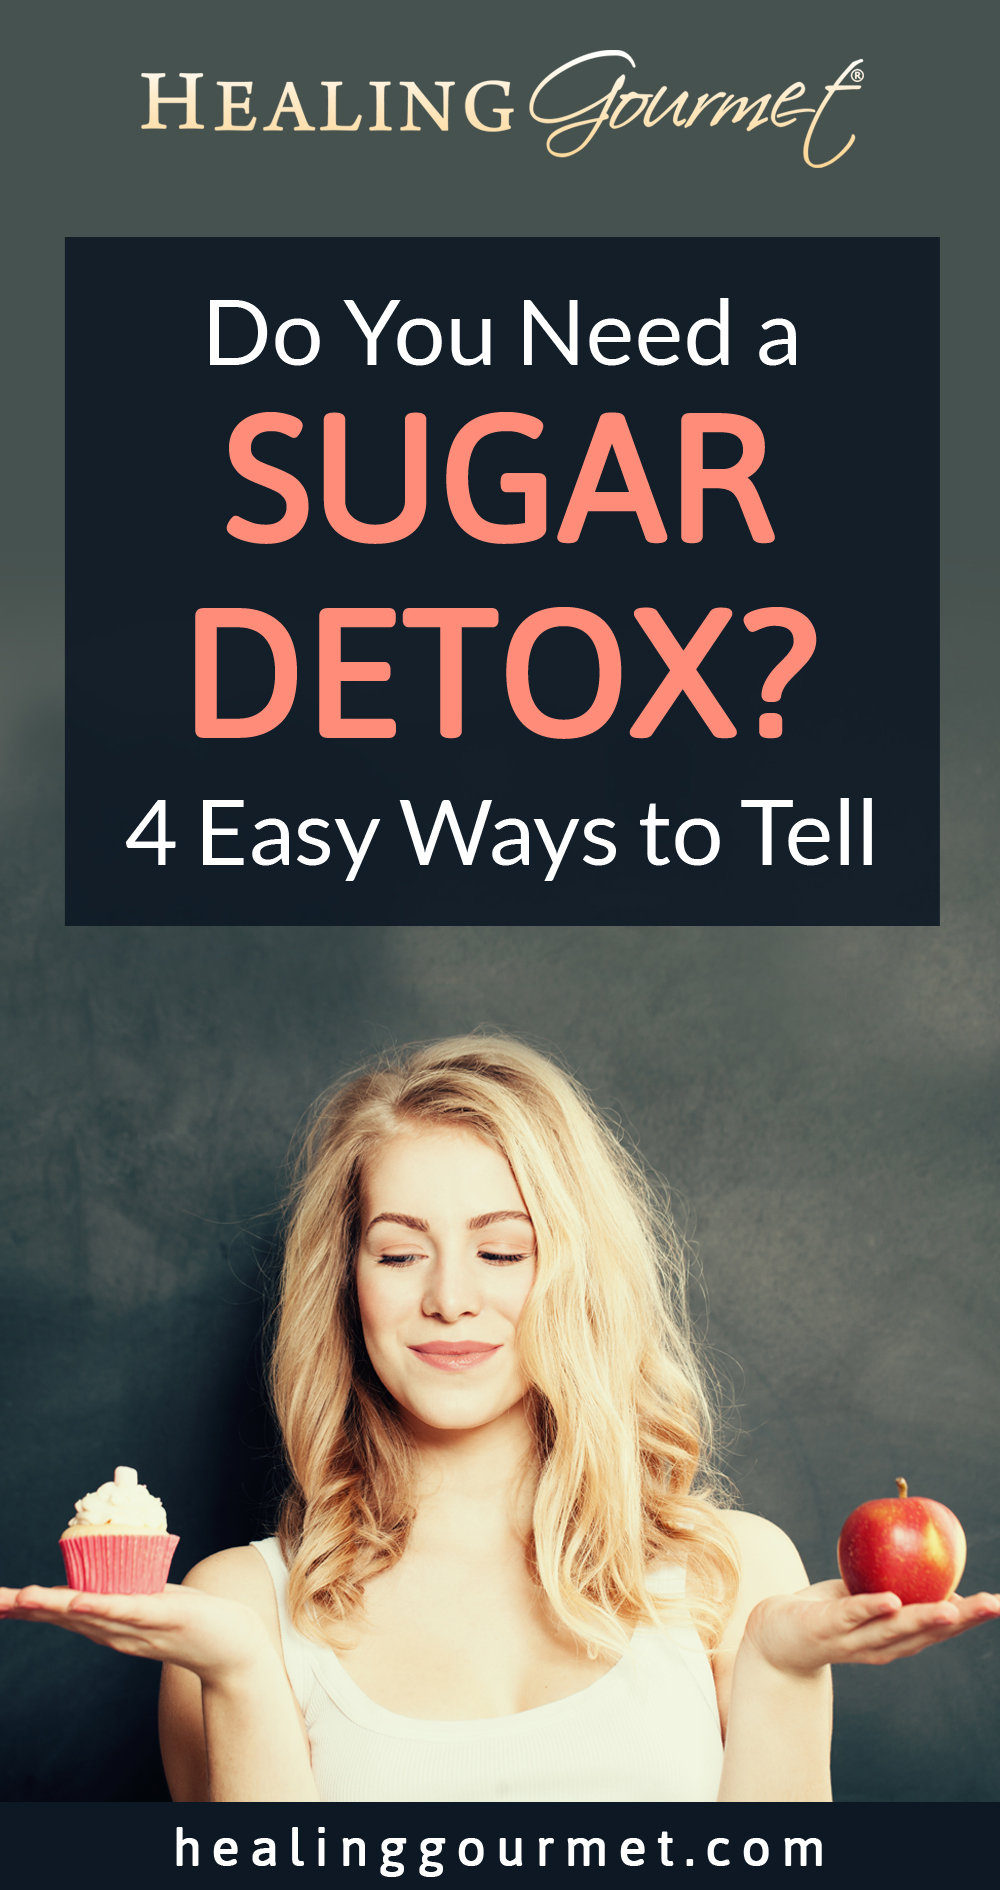 Do You Need a Sugar Detox? (4 Easy Ways to Tell)